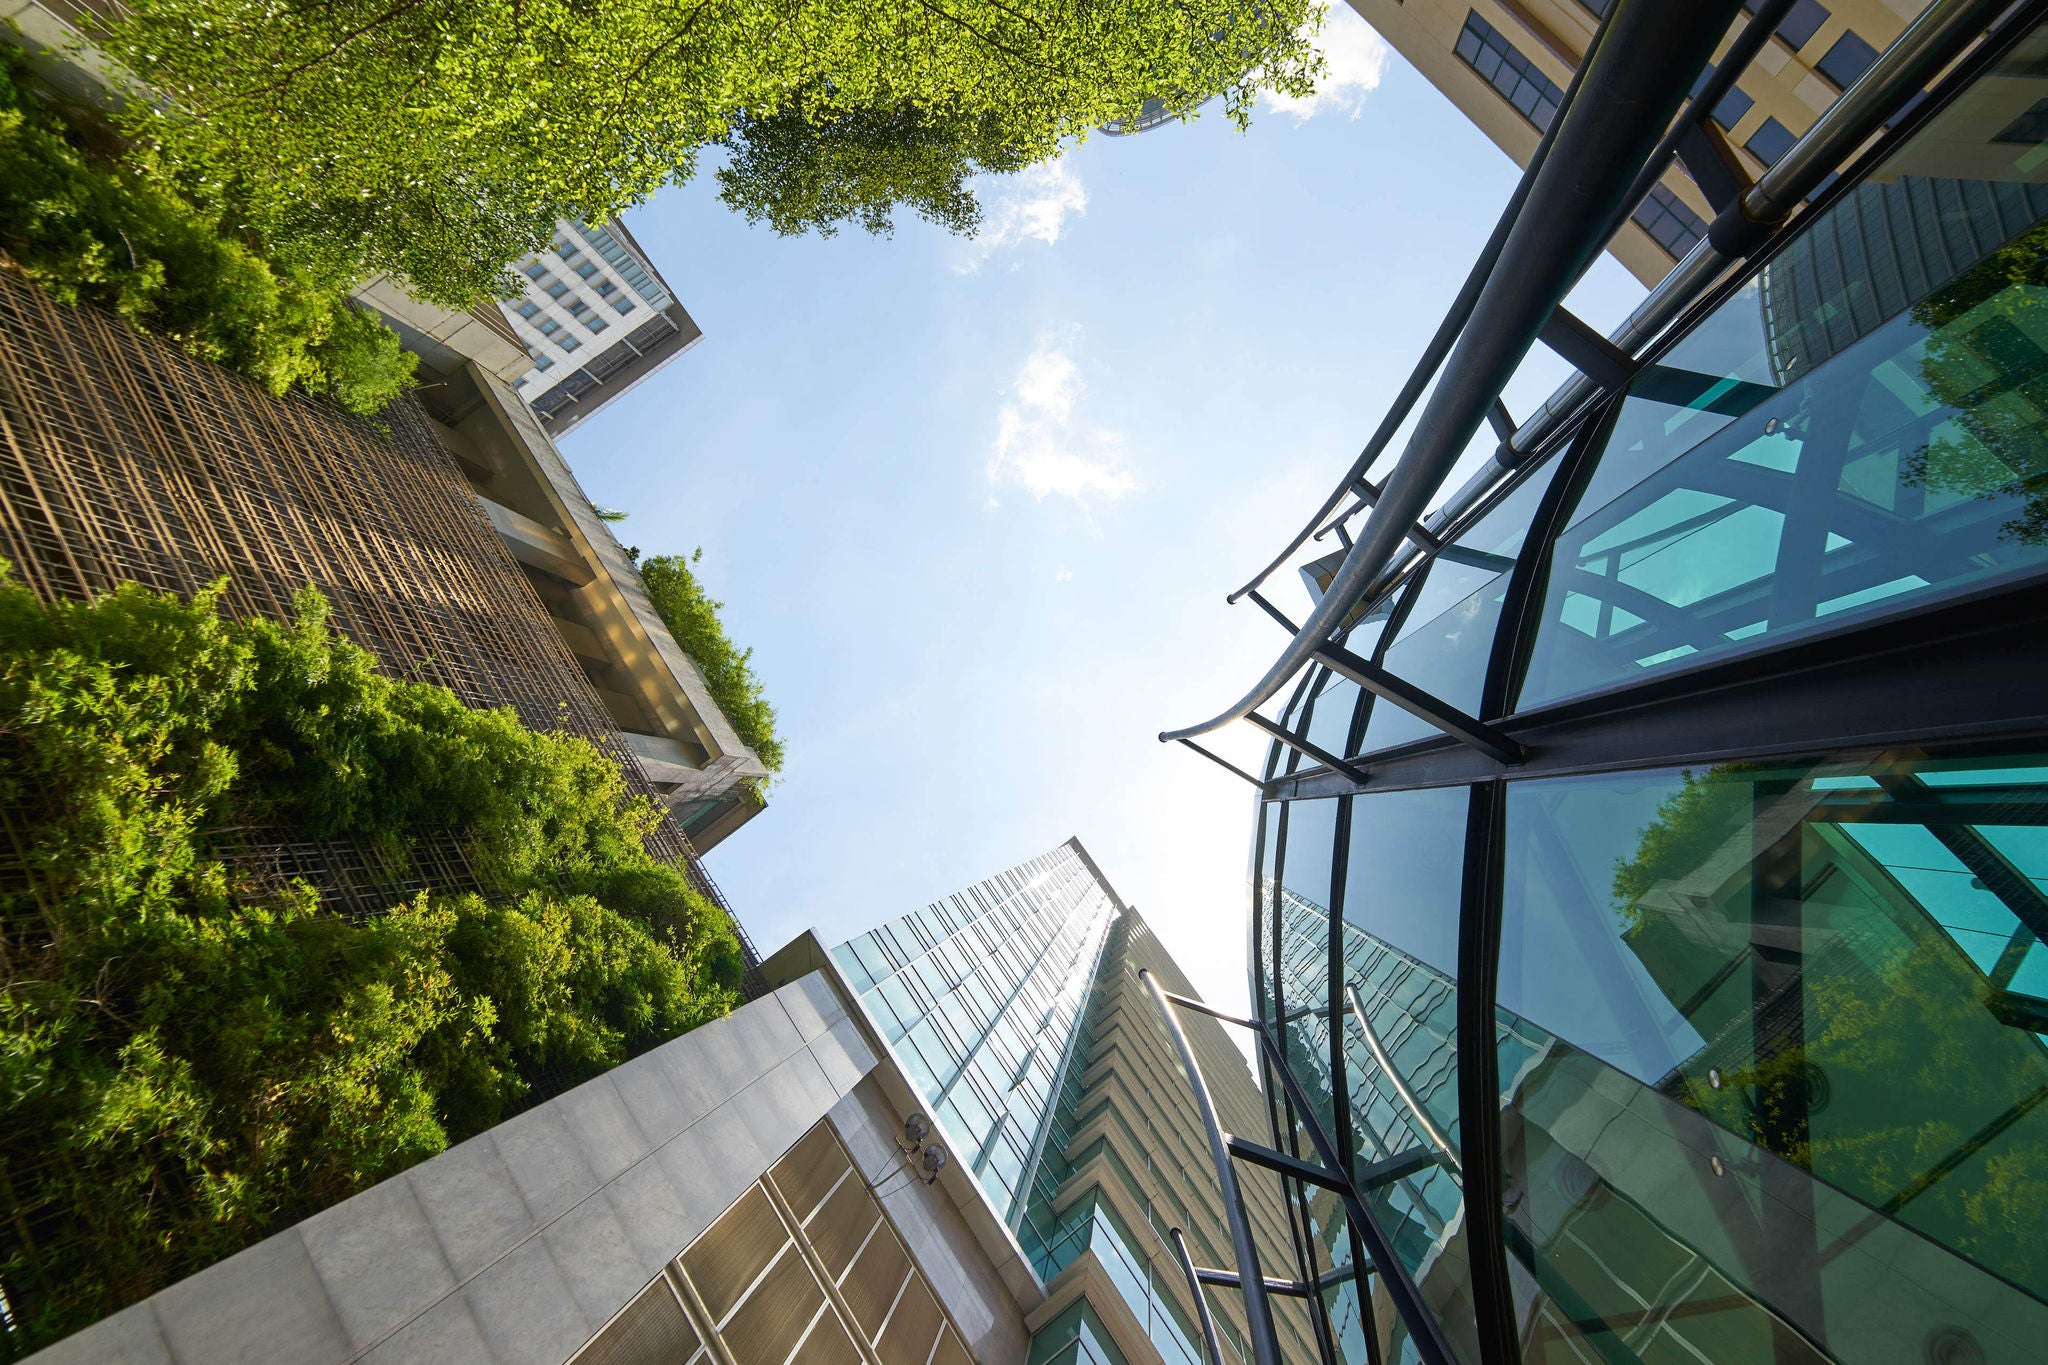 Low angle shot of modern glass buildings and green with clear sky background